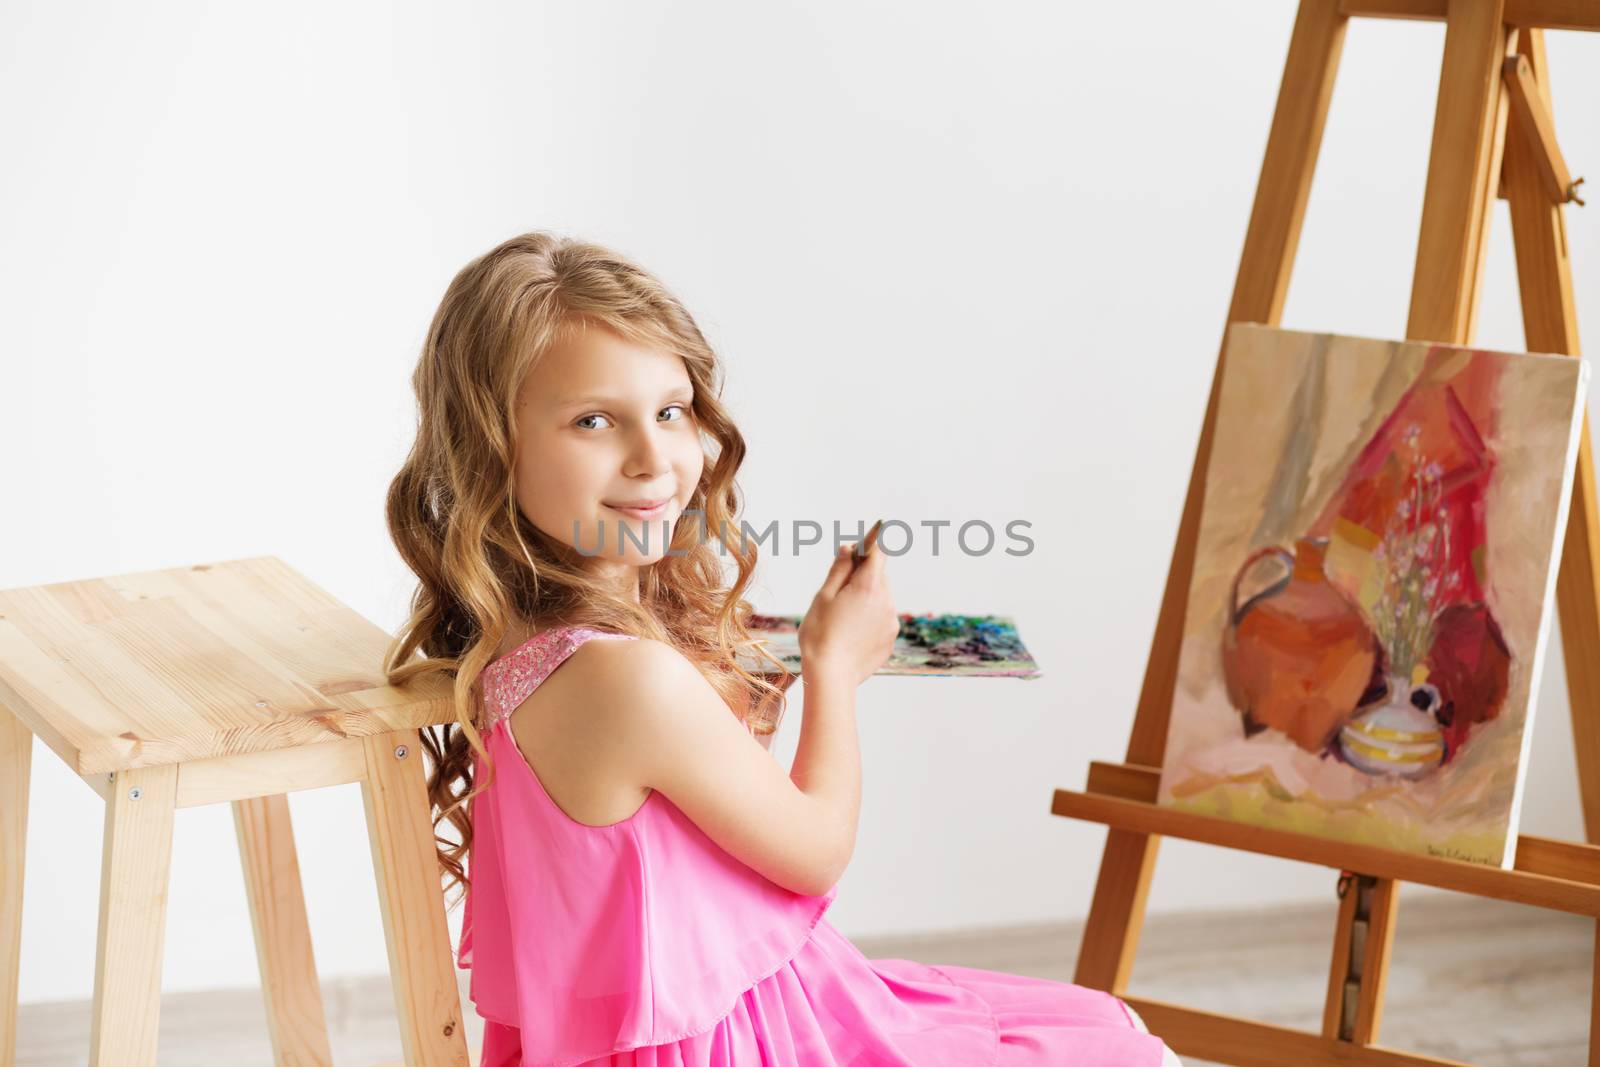 Portrait of a lovely little girl painting a picture in a studio or art school. Creative pensive painter child paints a colorful picture on canvas with oil colors in workshop. Talented kids